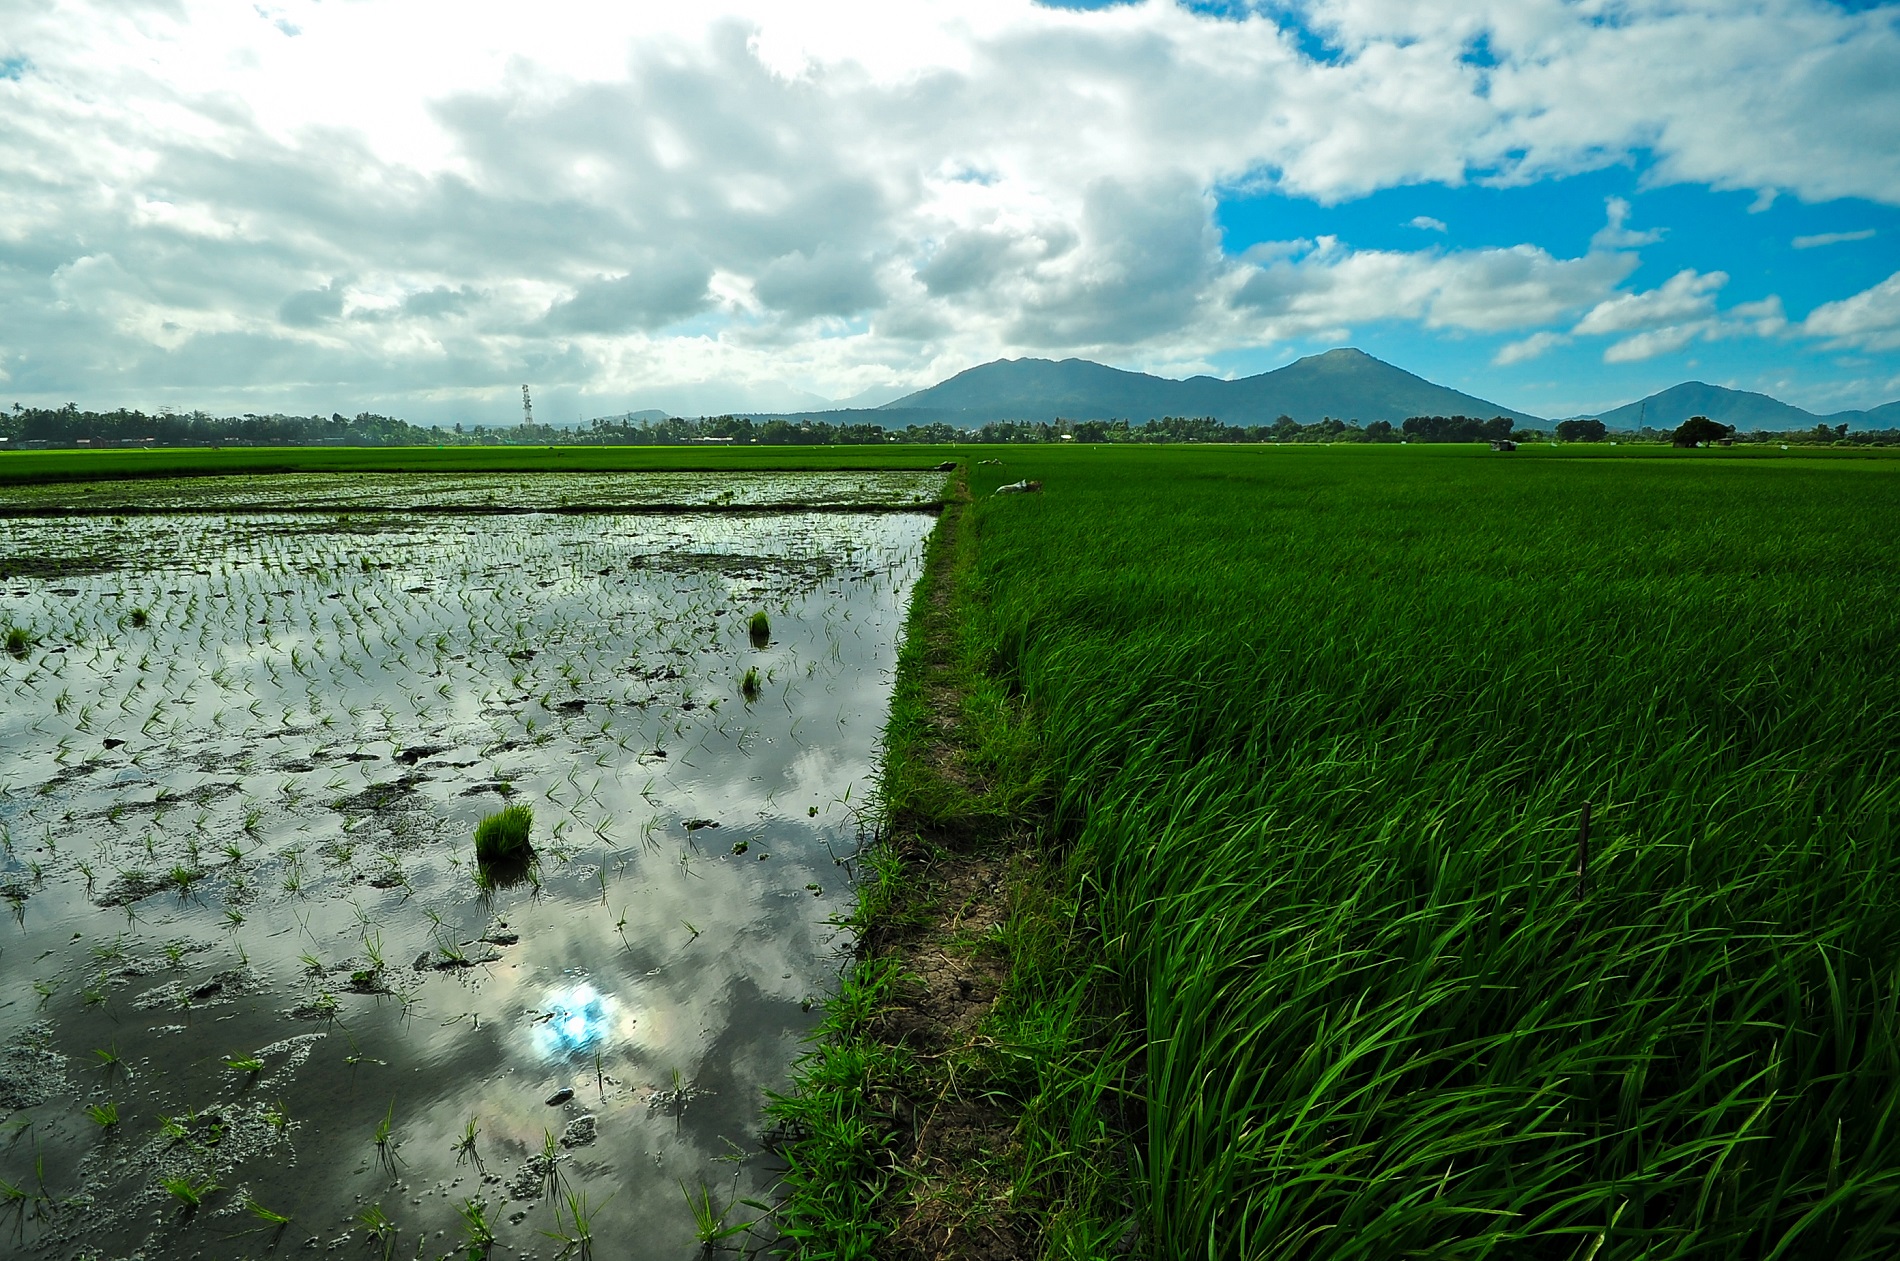 Cagayan farmers get drought-resistant rice variety